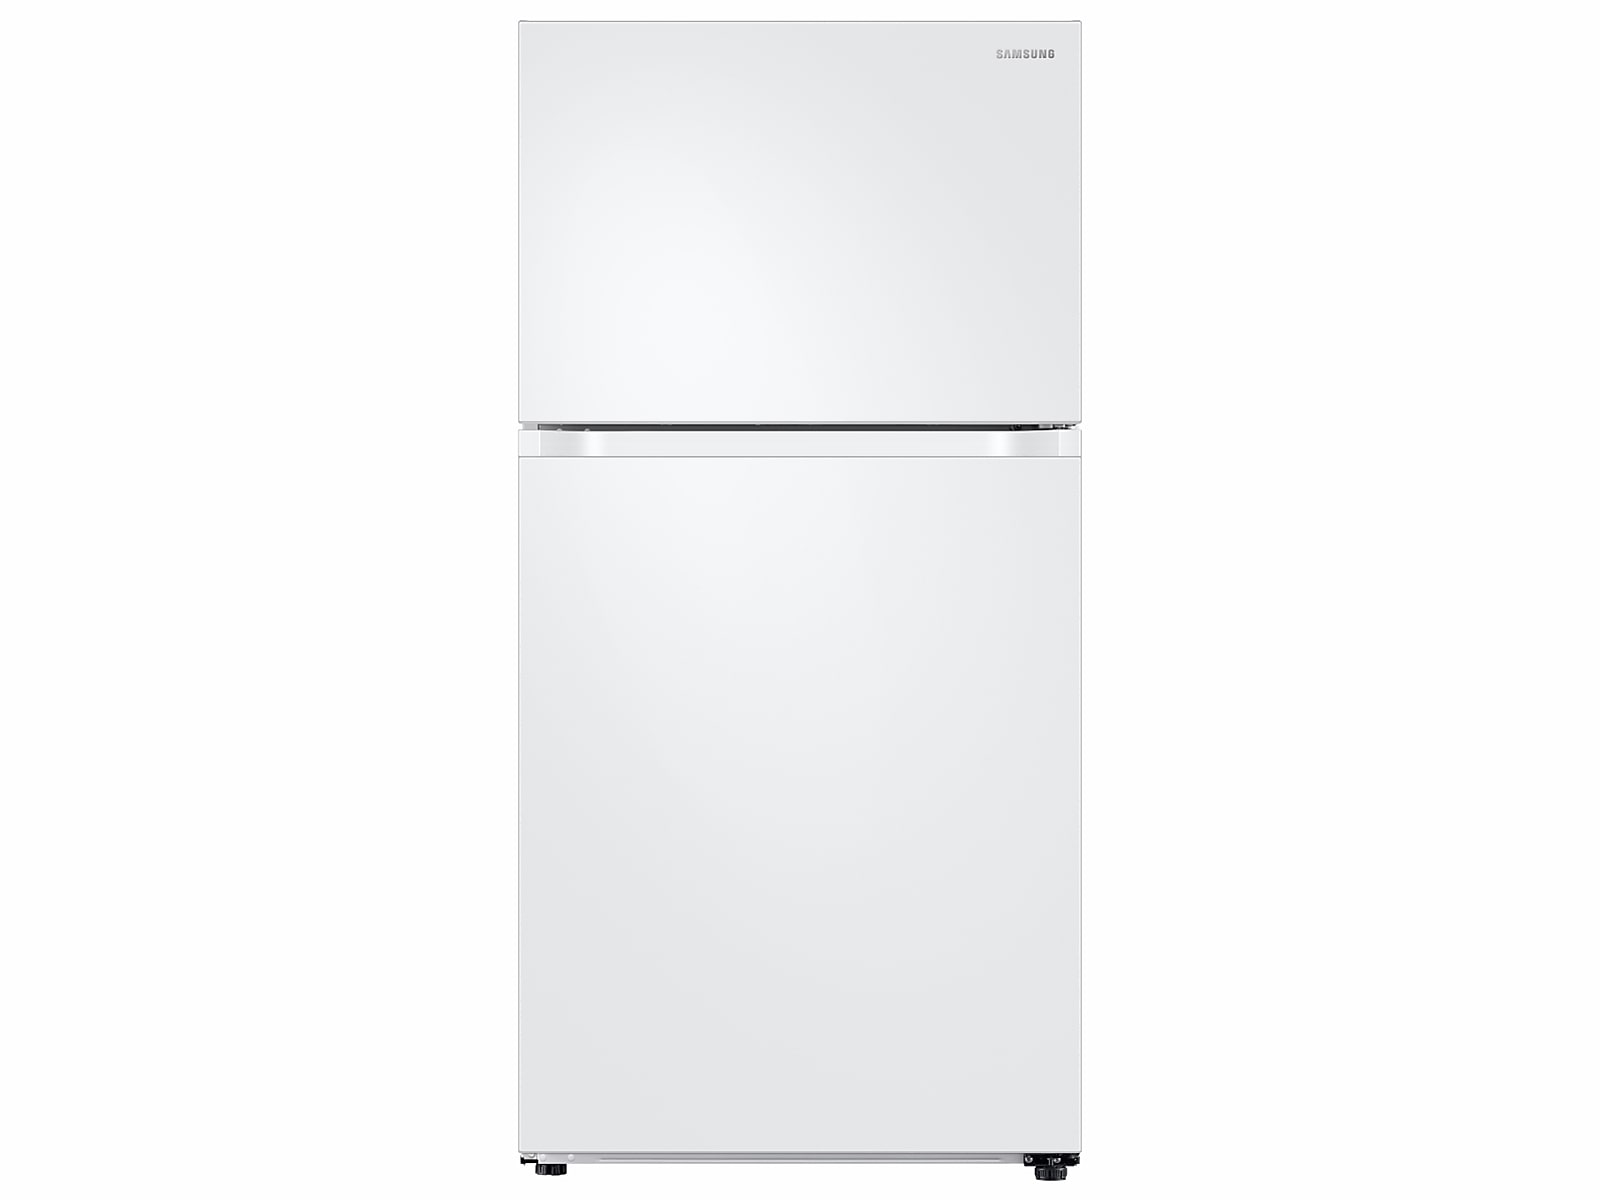 Samsung 21 cu. ft. Top Freezer Refrigerator with FlexZone™ and Ice Maker in White(RT21M6215WW/AA) photo